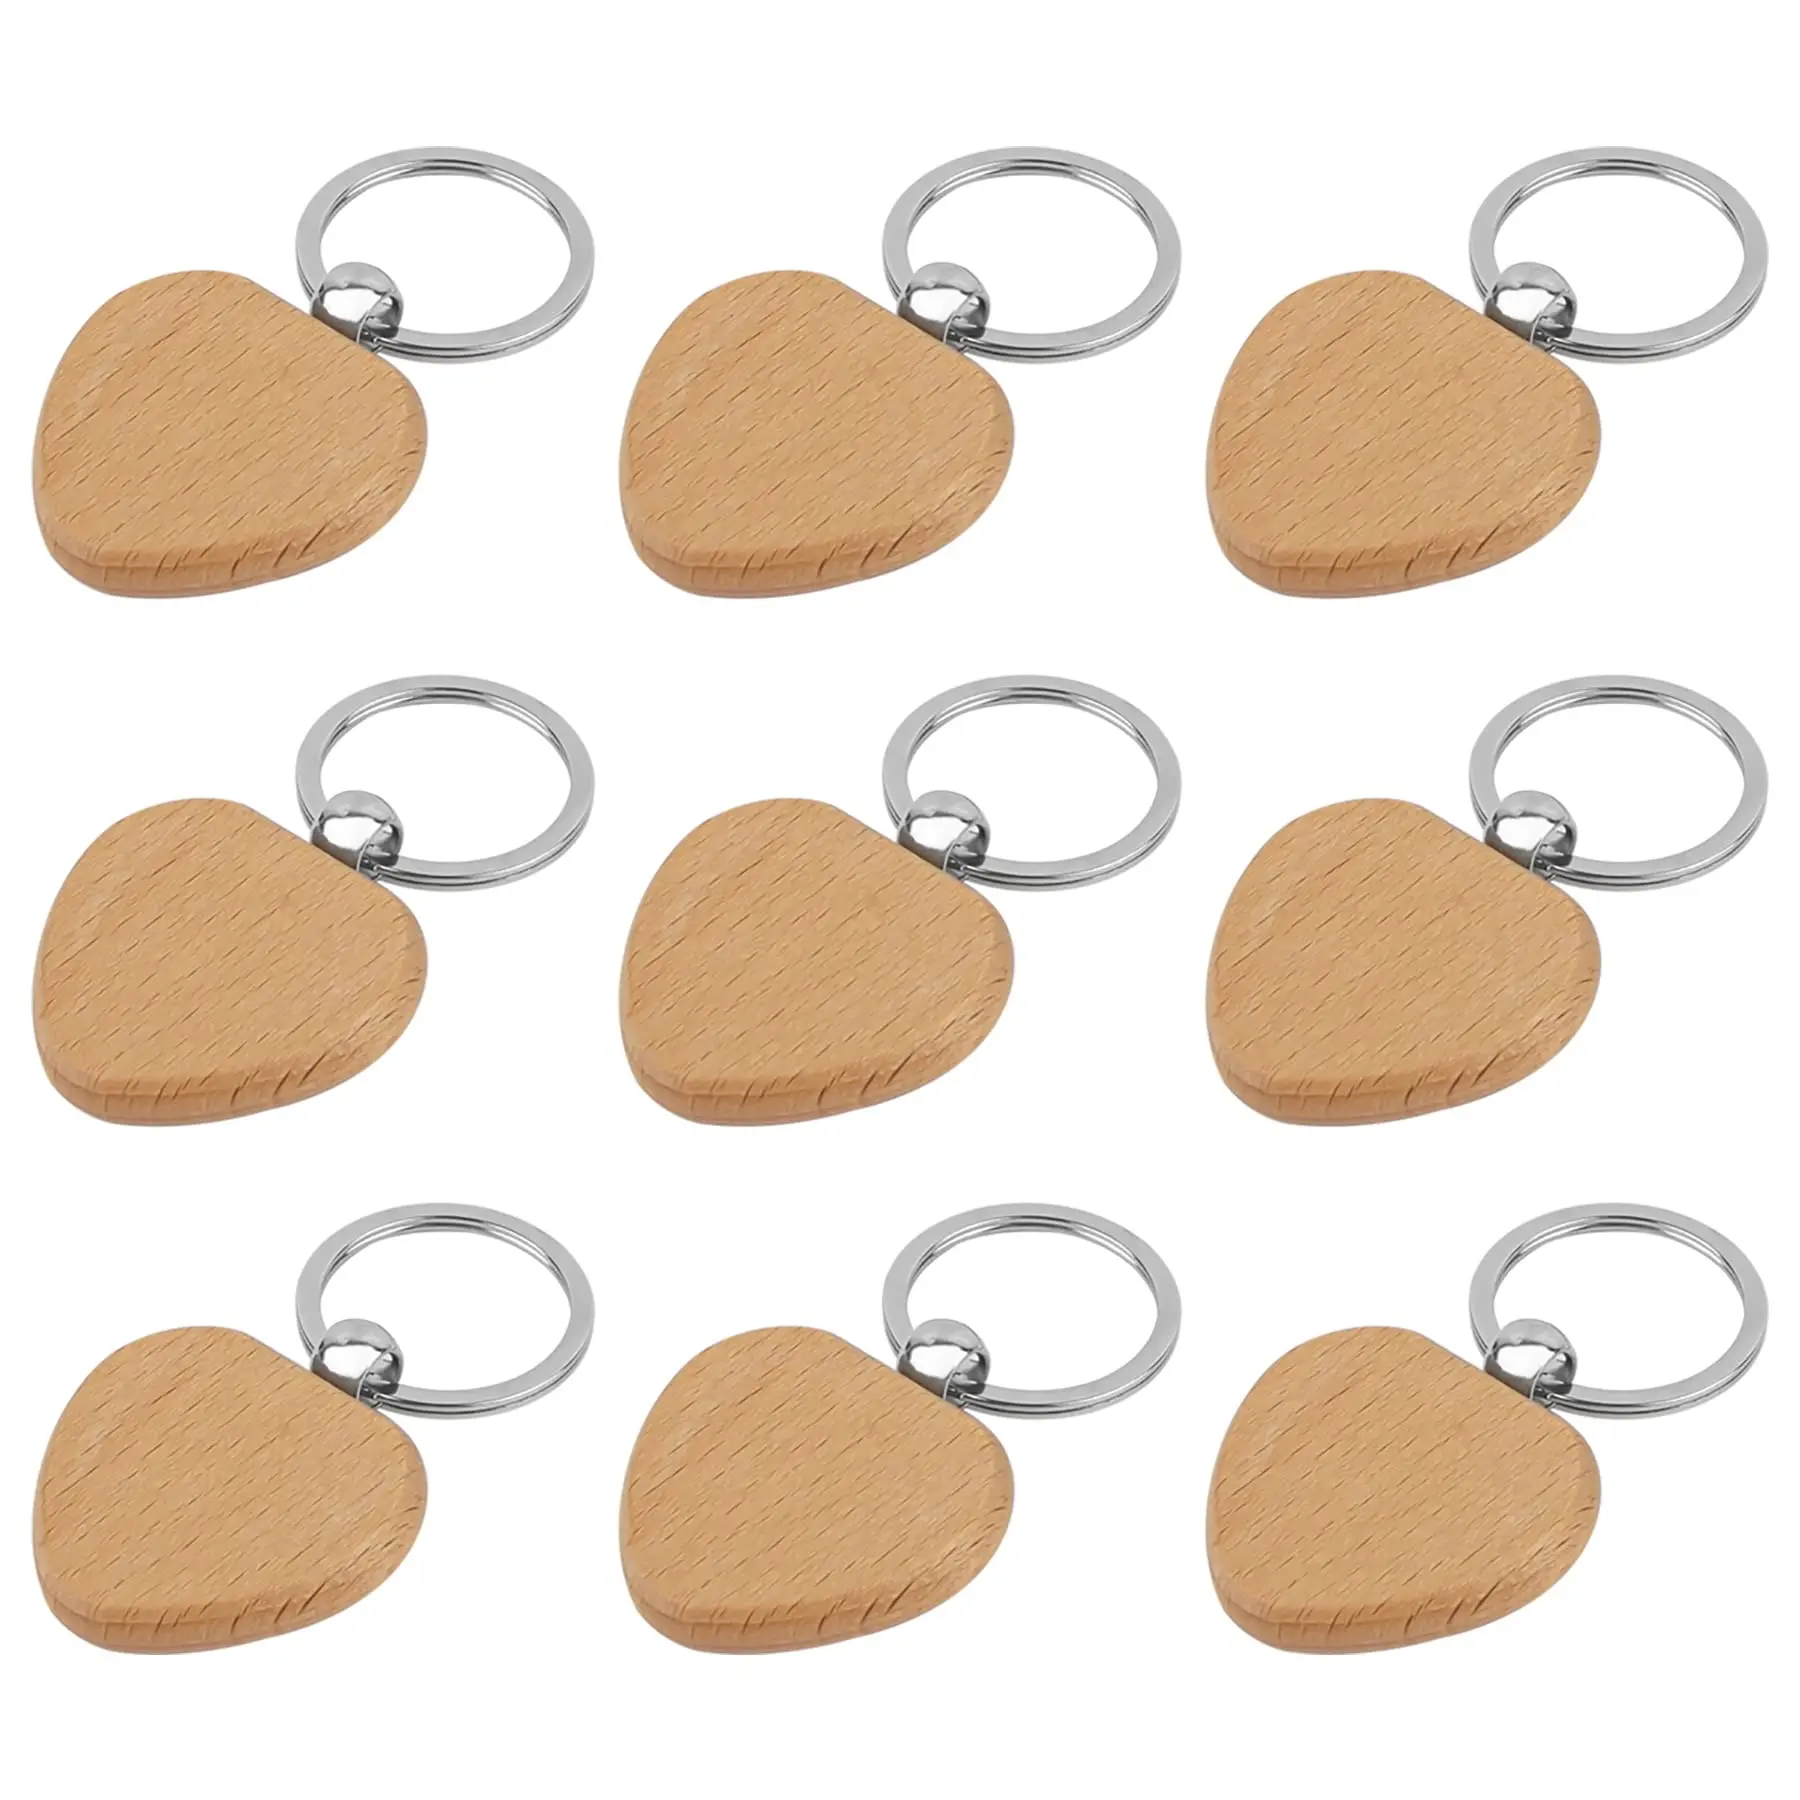 

20Pcs Blank Heart Wooden Key Chain DIY Promotion Pendant Wood Keychain Keyring Tags Promotional Gifts